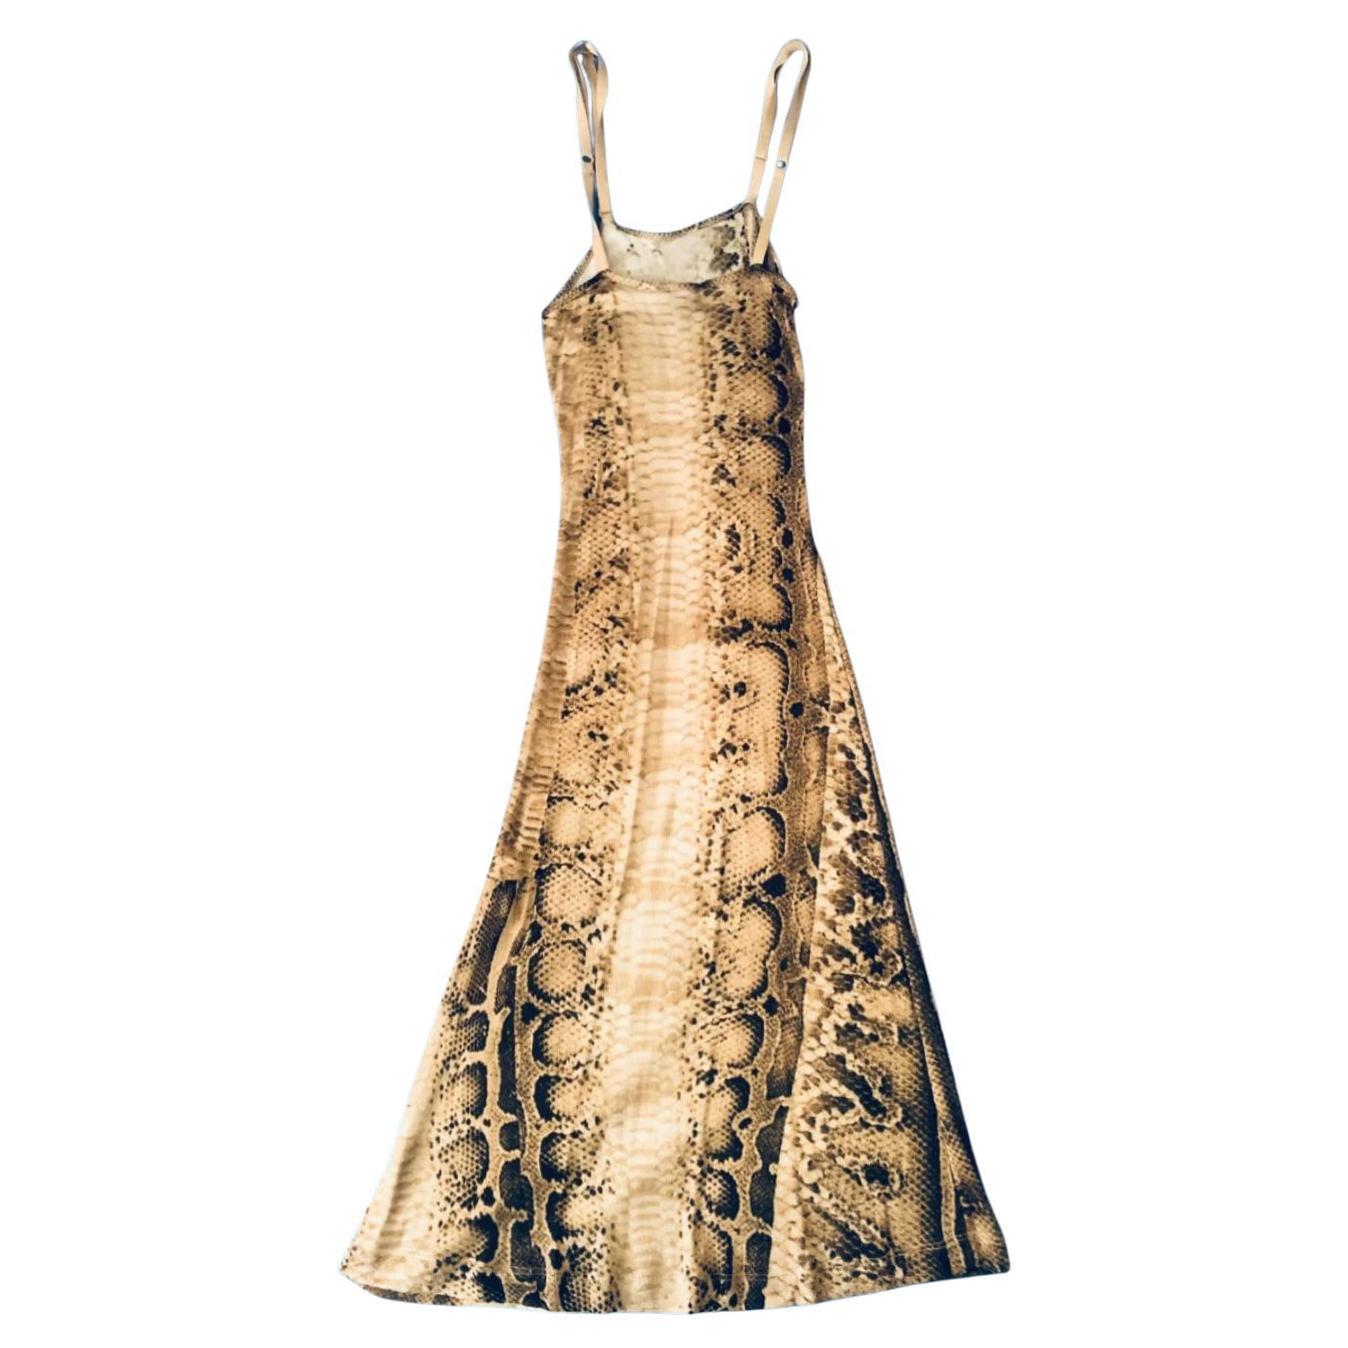 Just Cavalli Python print summer dress 
Brown and white print, knee length, stretchy that can fit both S and M sizes

Condition: vintage, very good condition, 2000s 

Size 
40/42 Italian 
8/10 UK 
0-2 USA 

100% polyamide